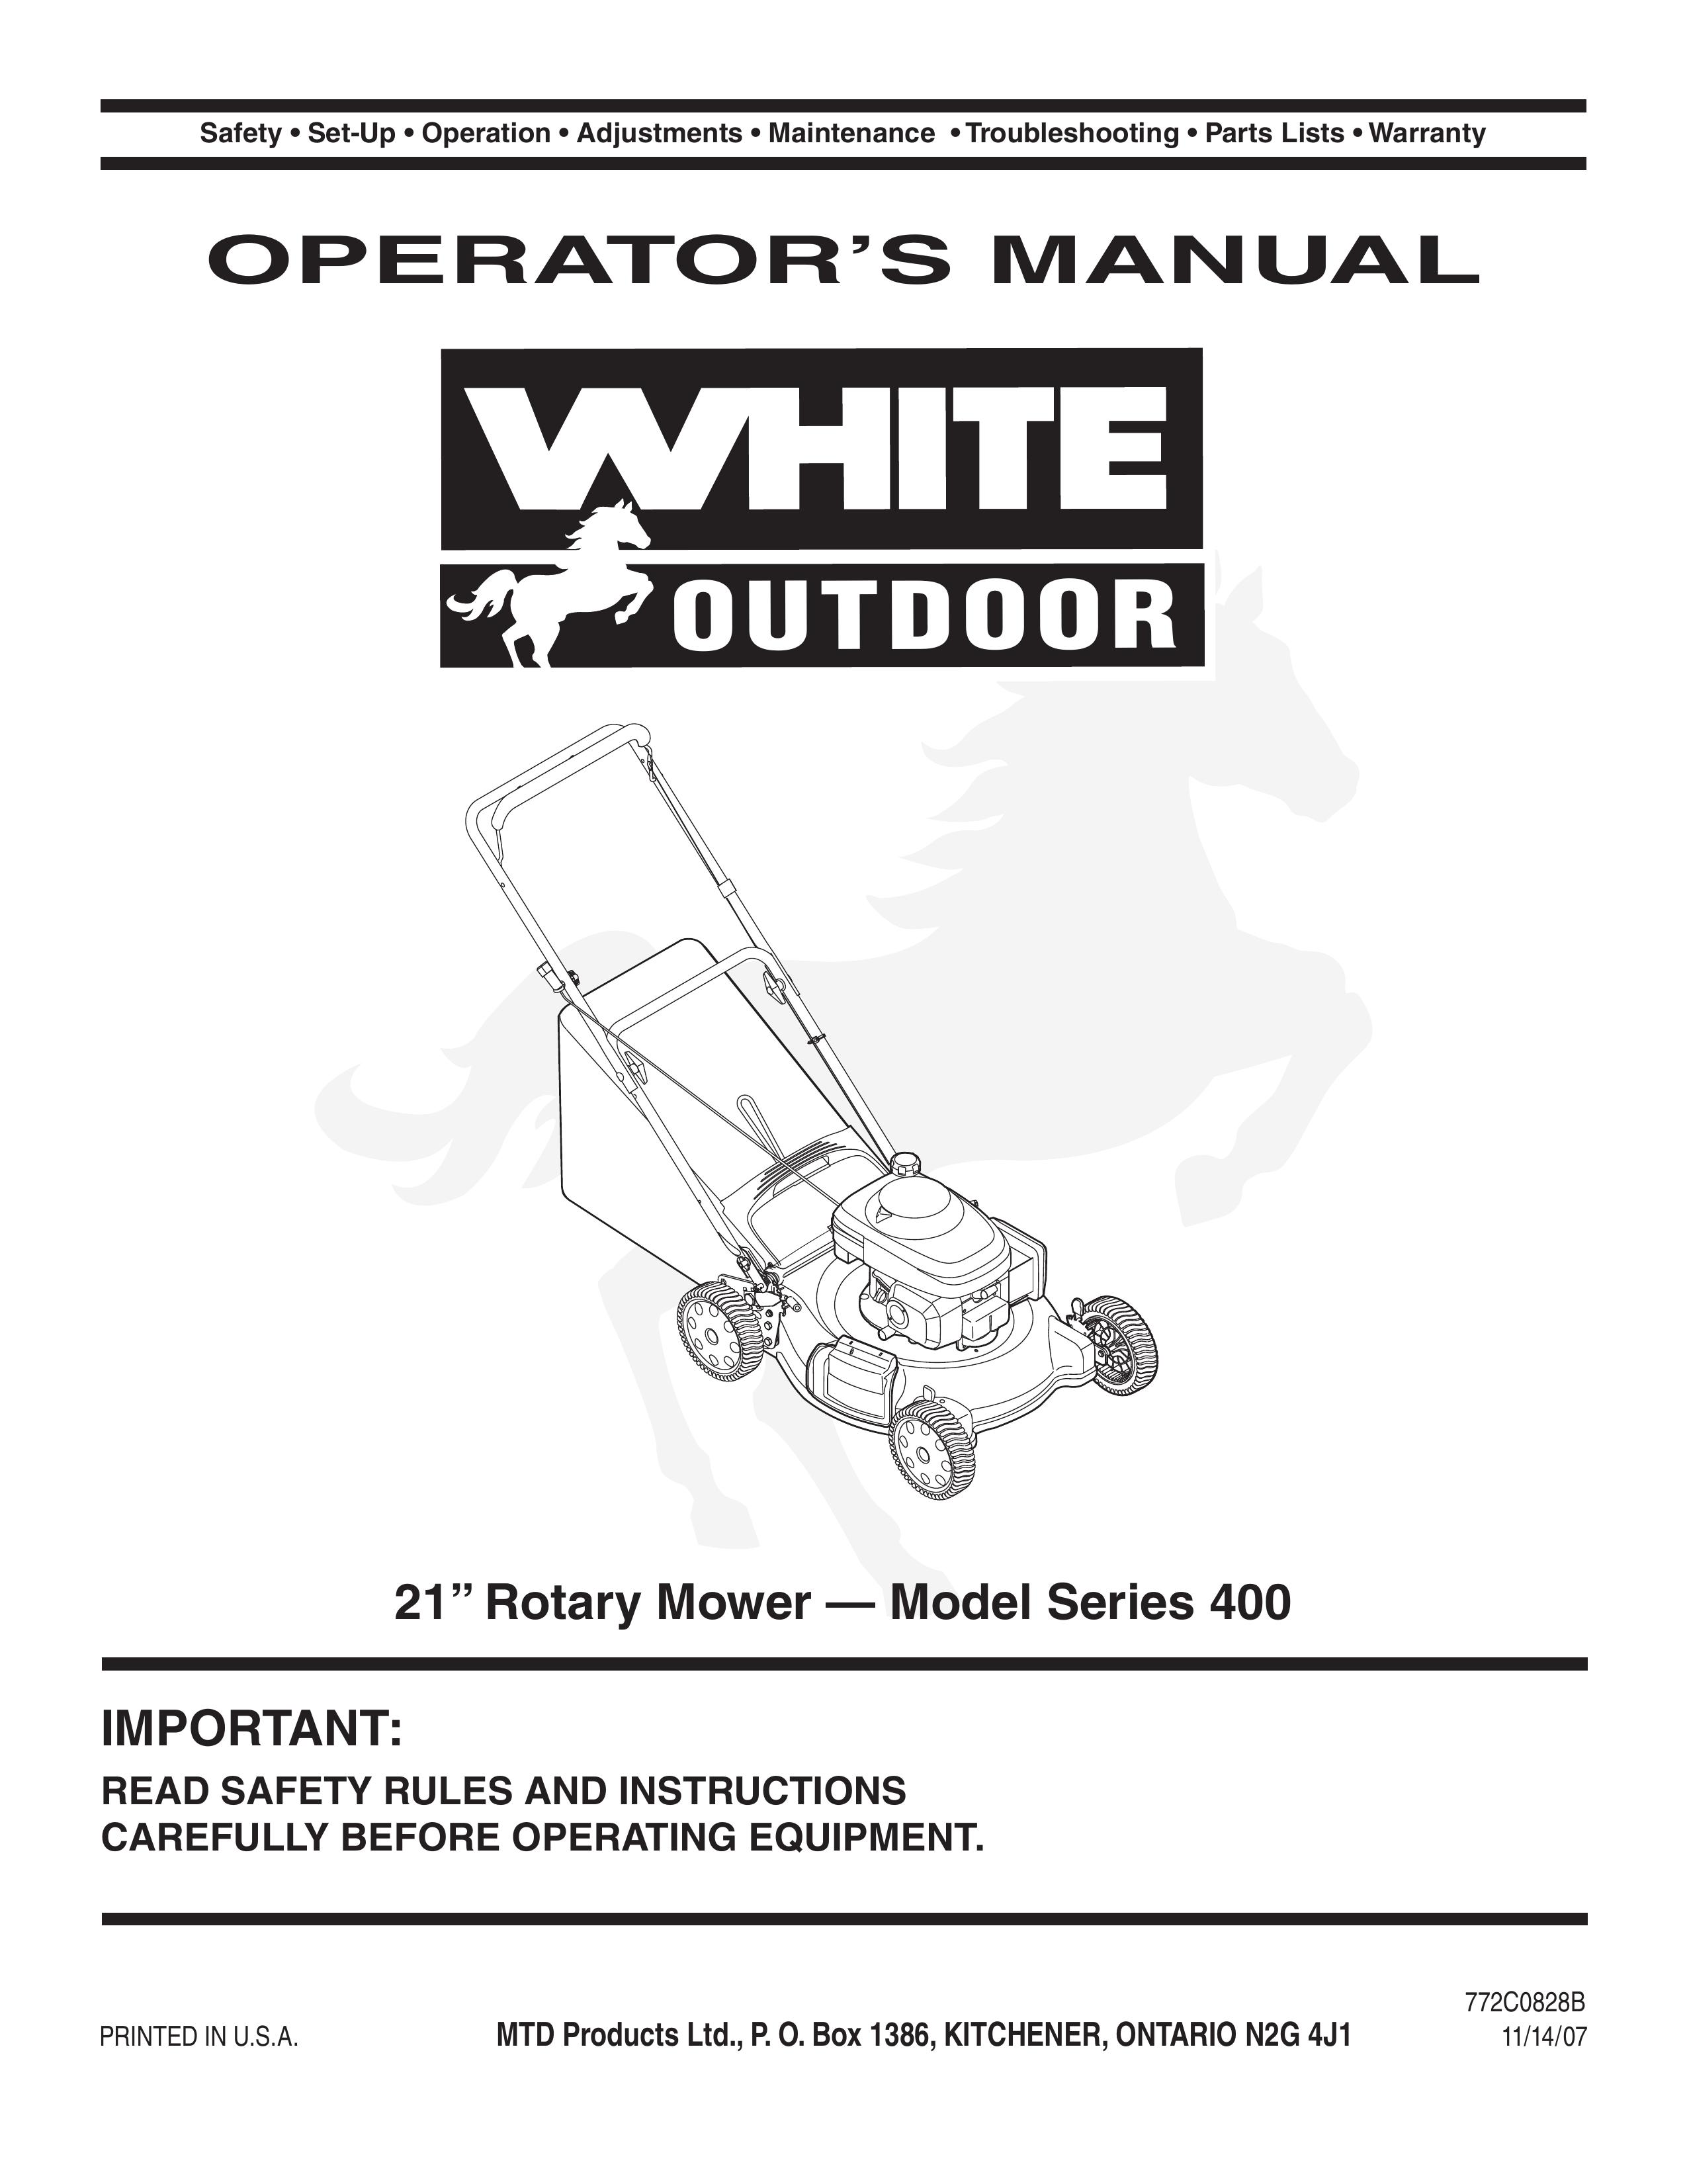 White Outdoor 400 Lawn Mower User Manual (Page 1)